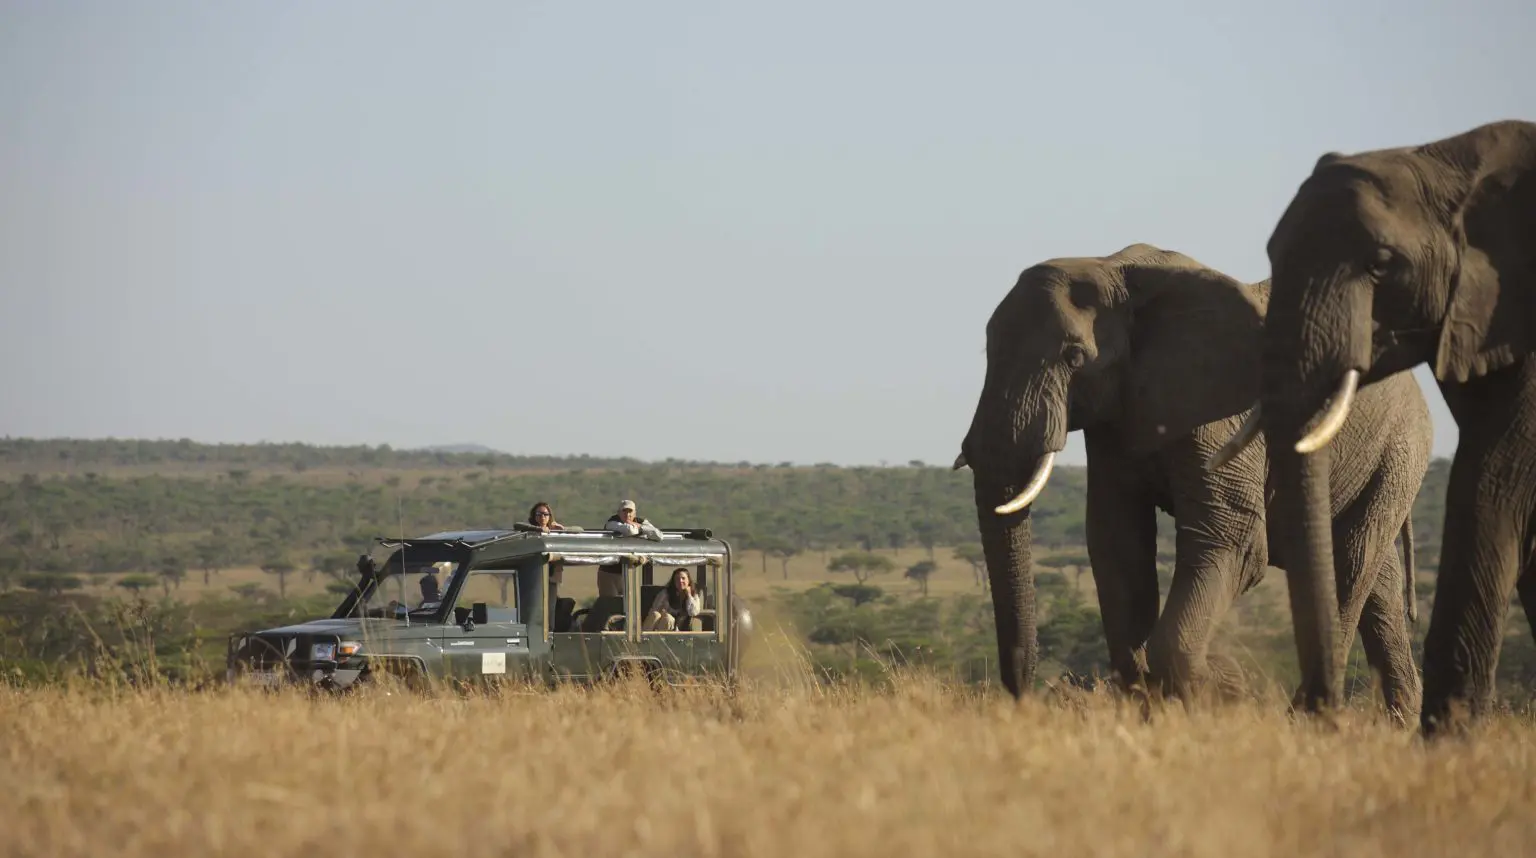 game drive at kicheche valley with people in a safari vehicle admiring a large elephant